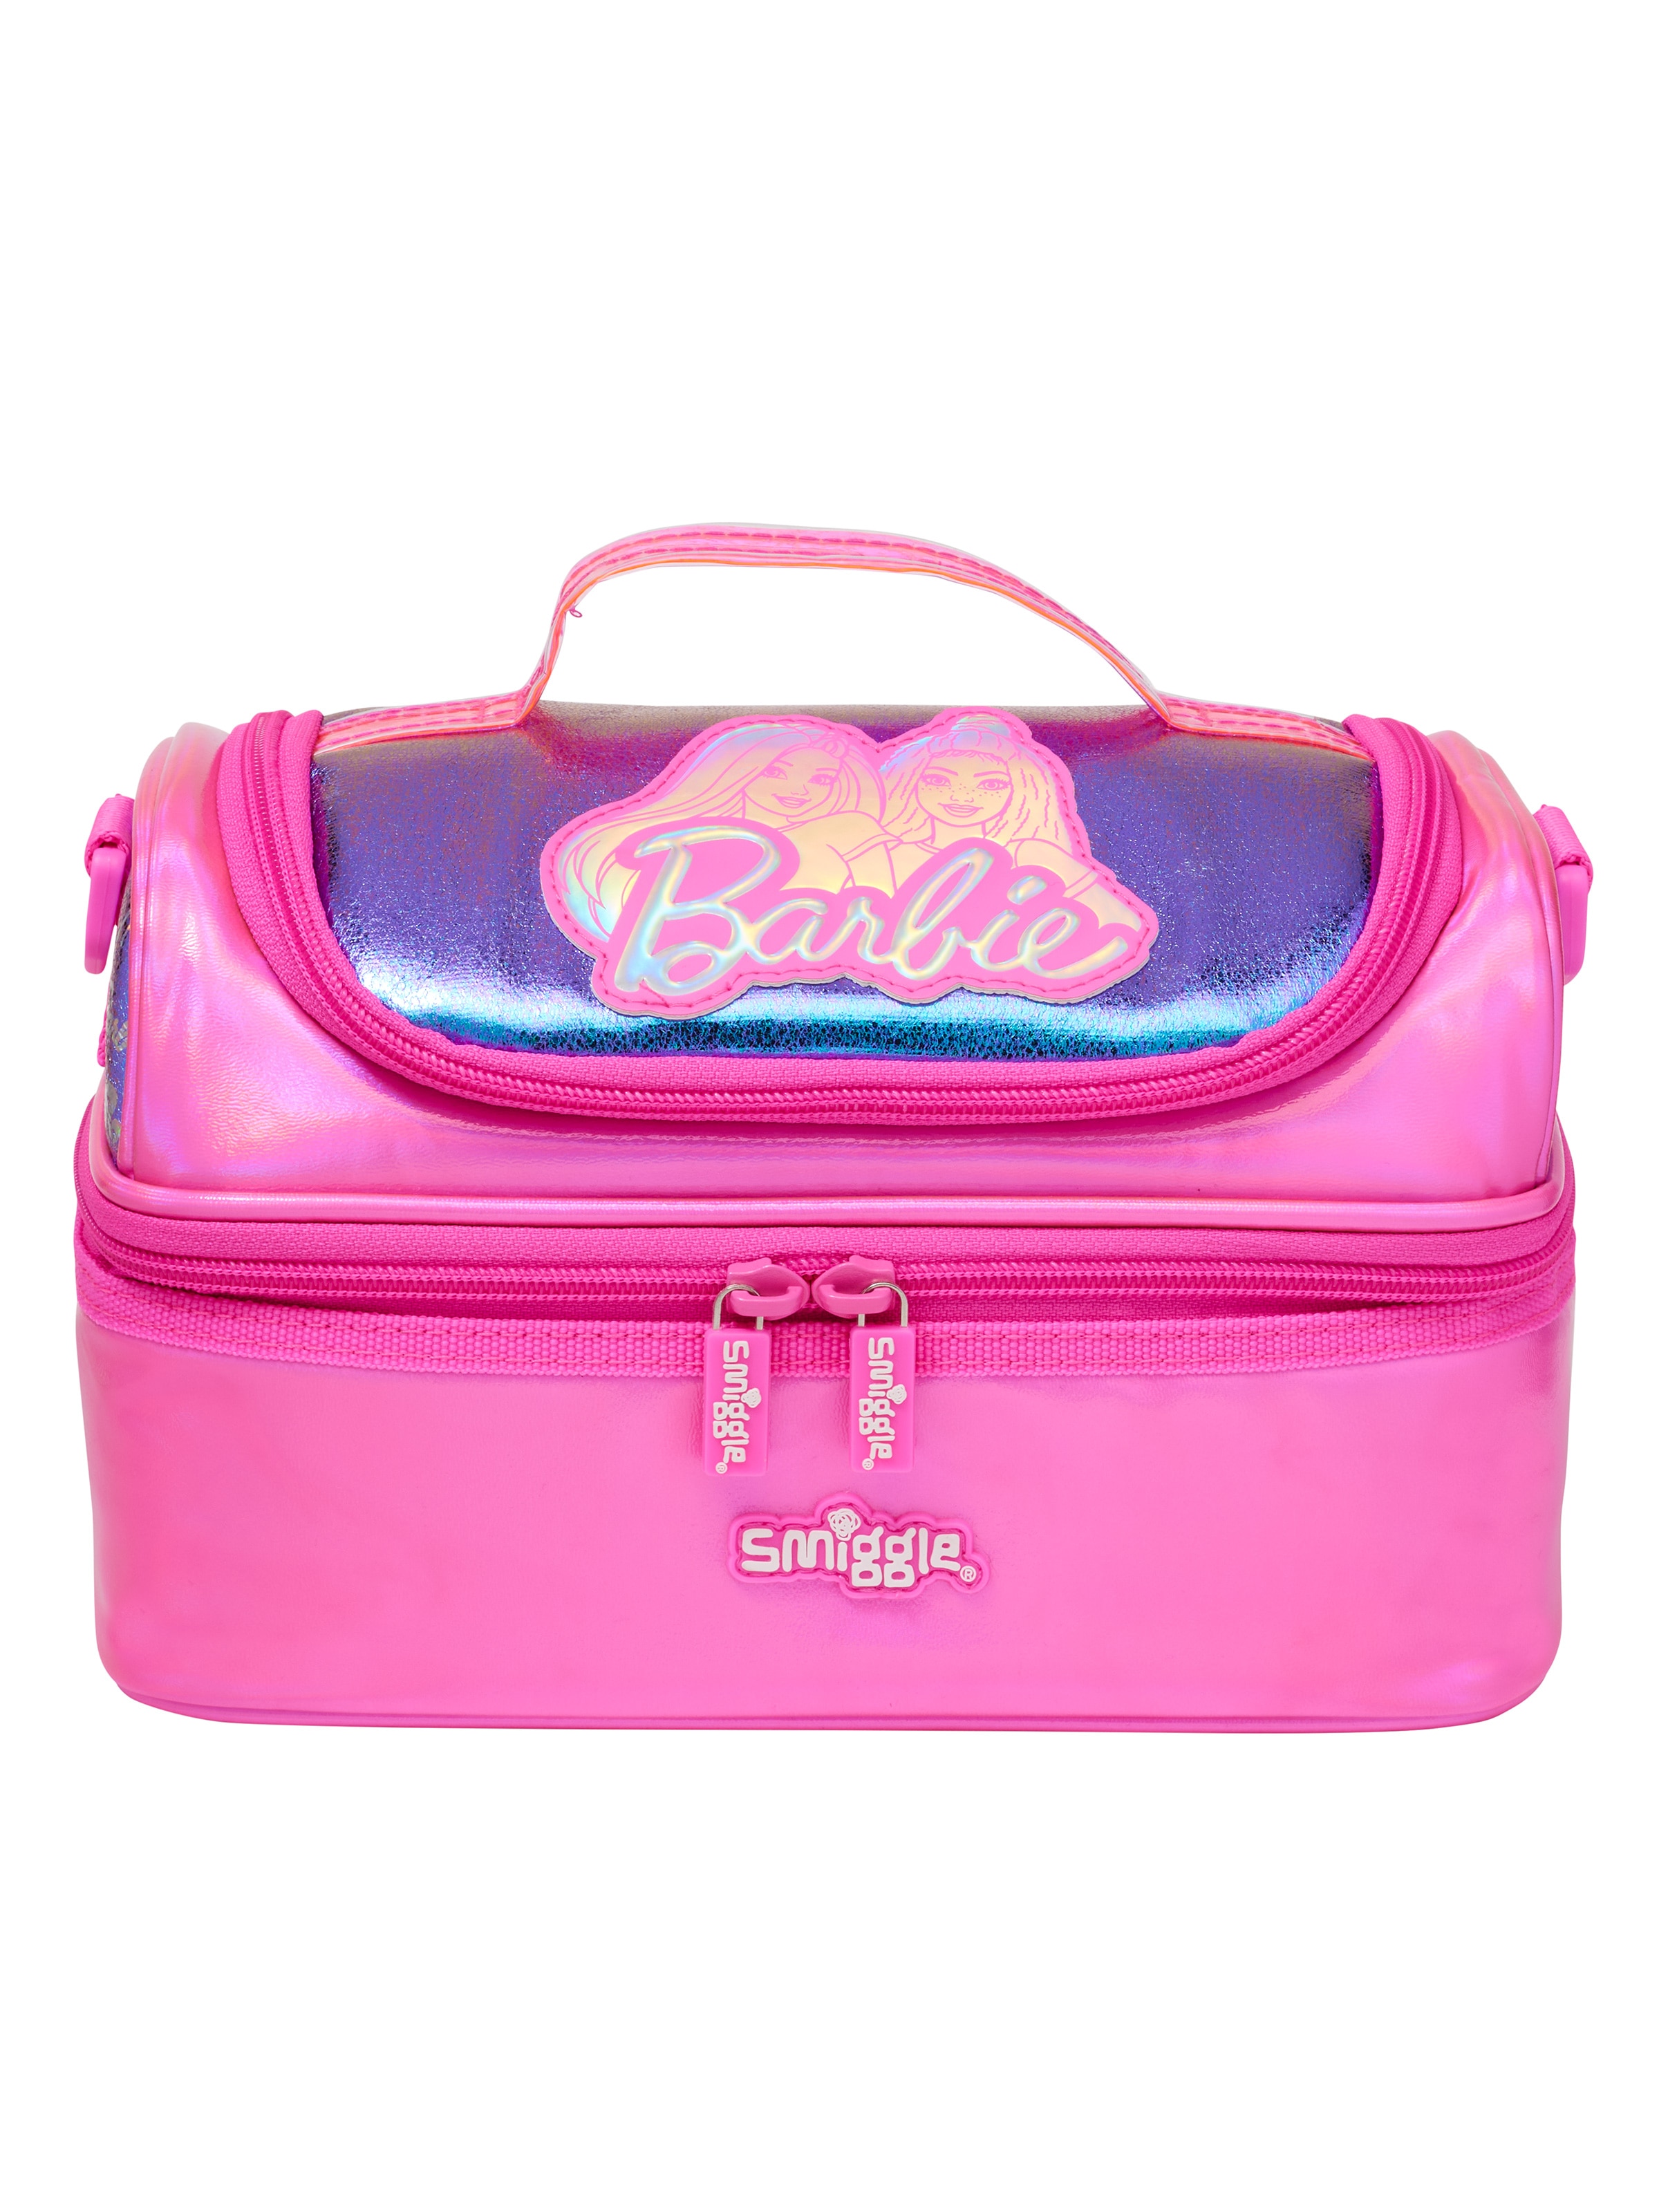 Barbie Always Show your Sparkle-Lunch Box